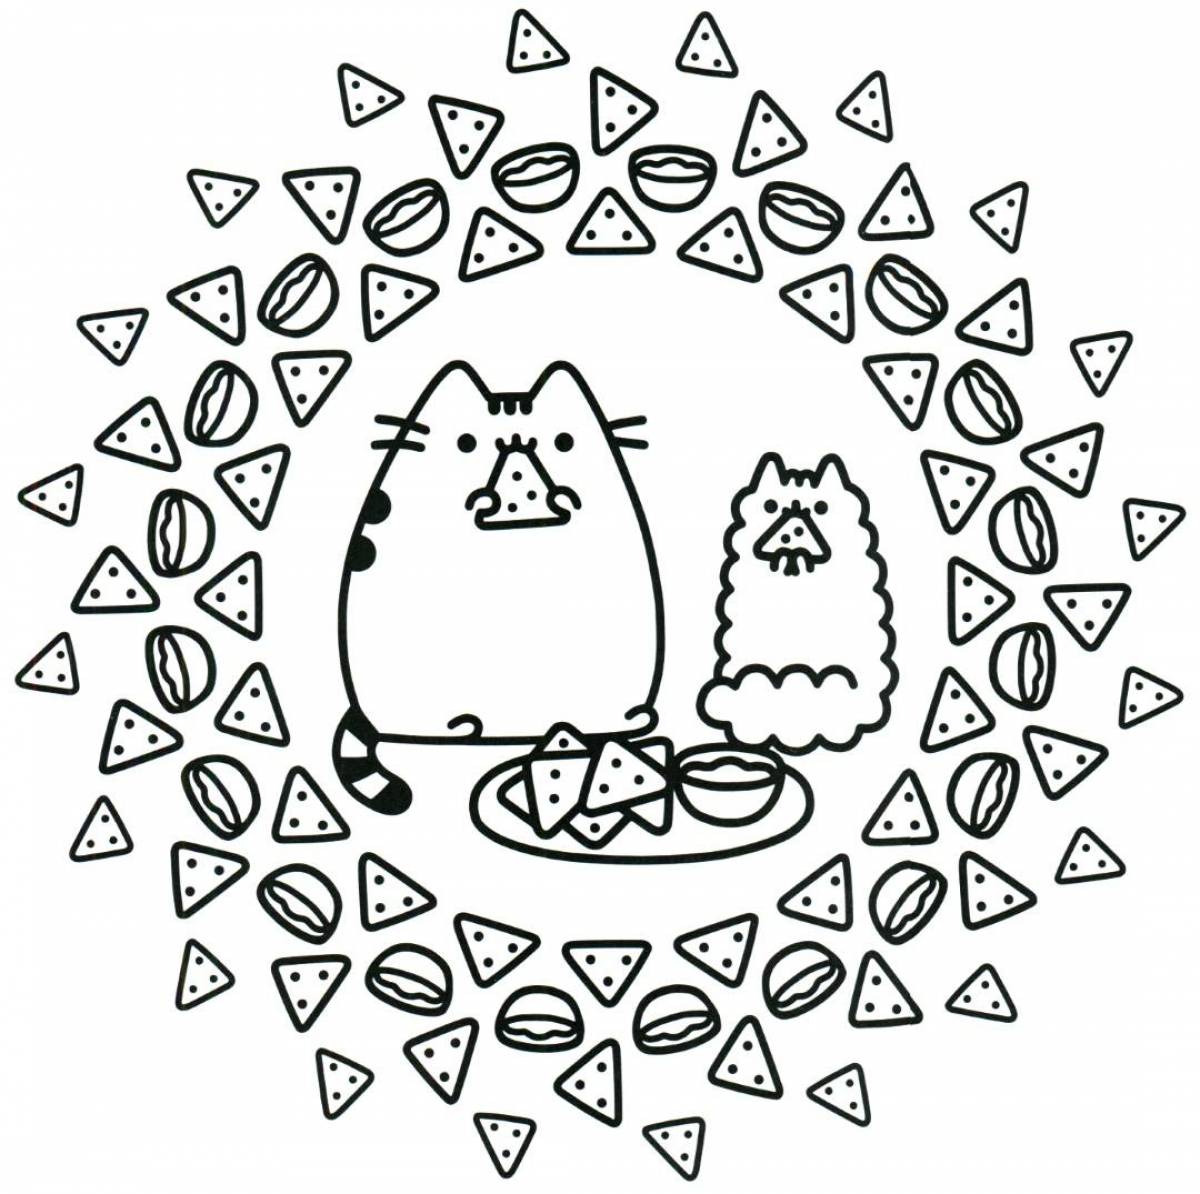 Colouring colorful-delight pusheen